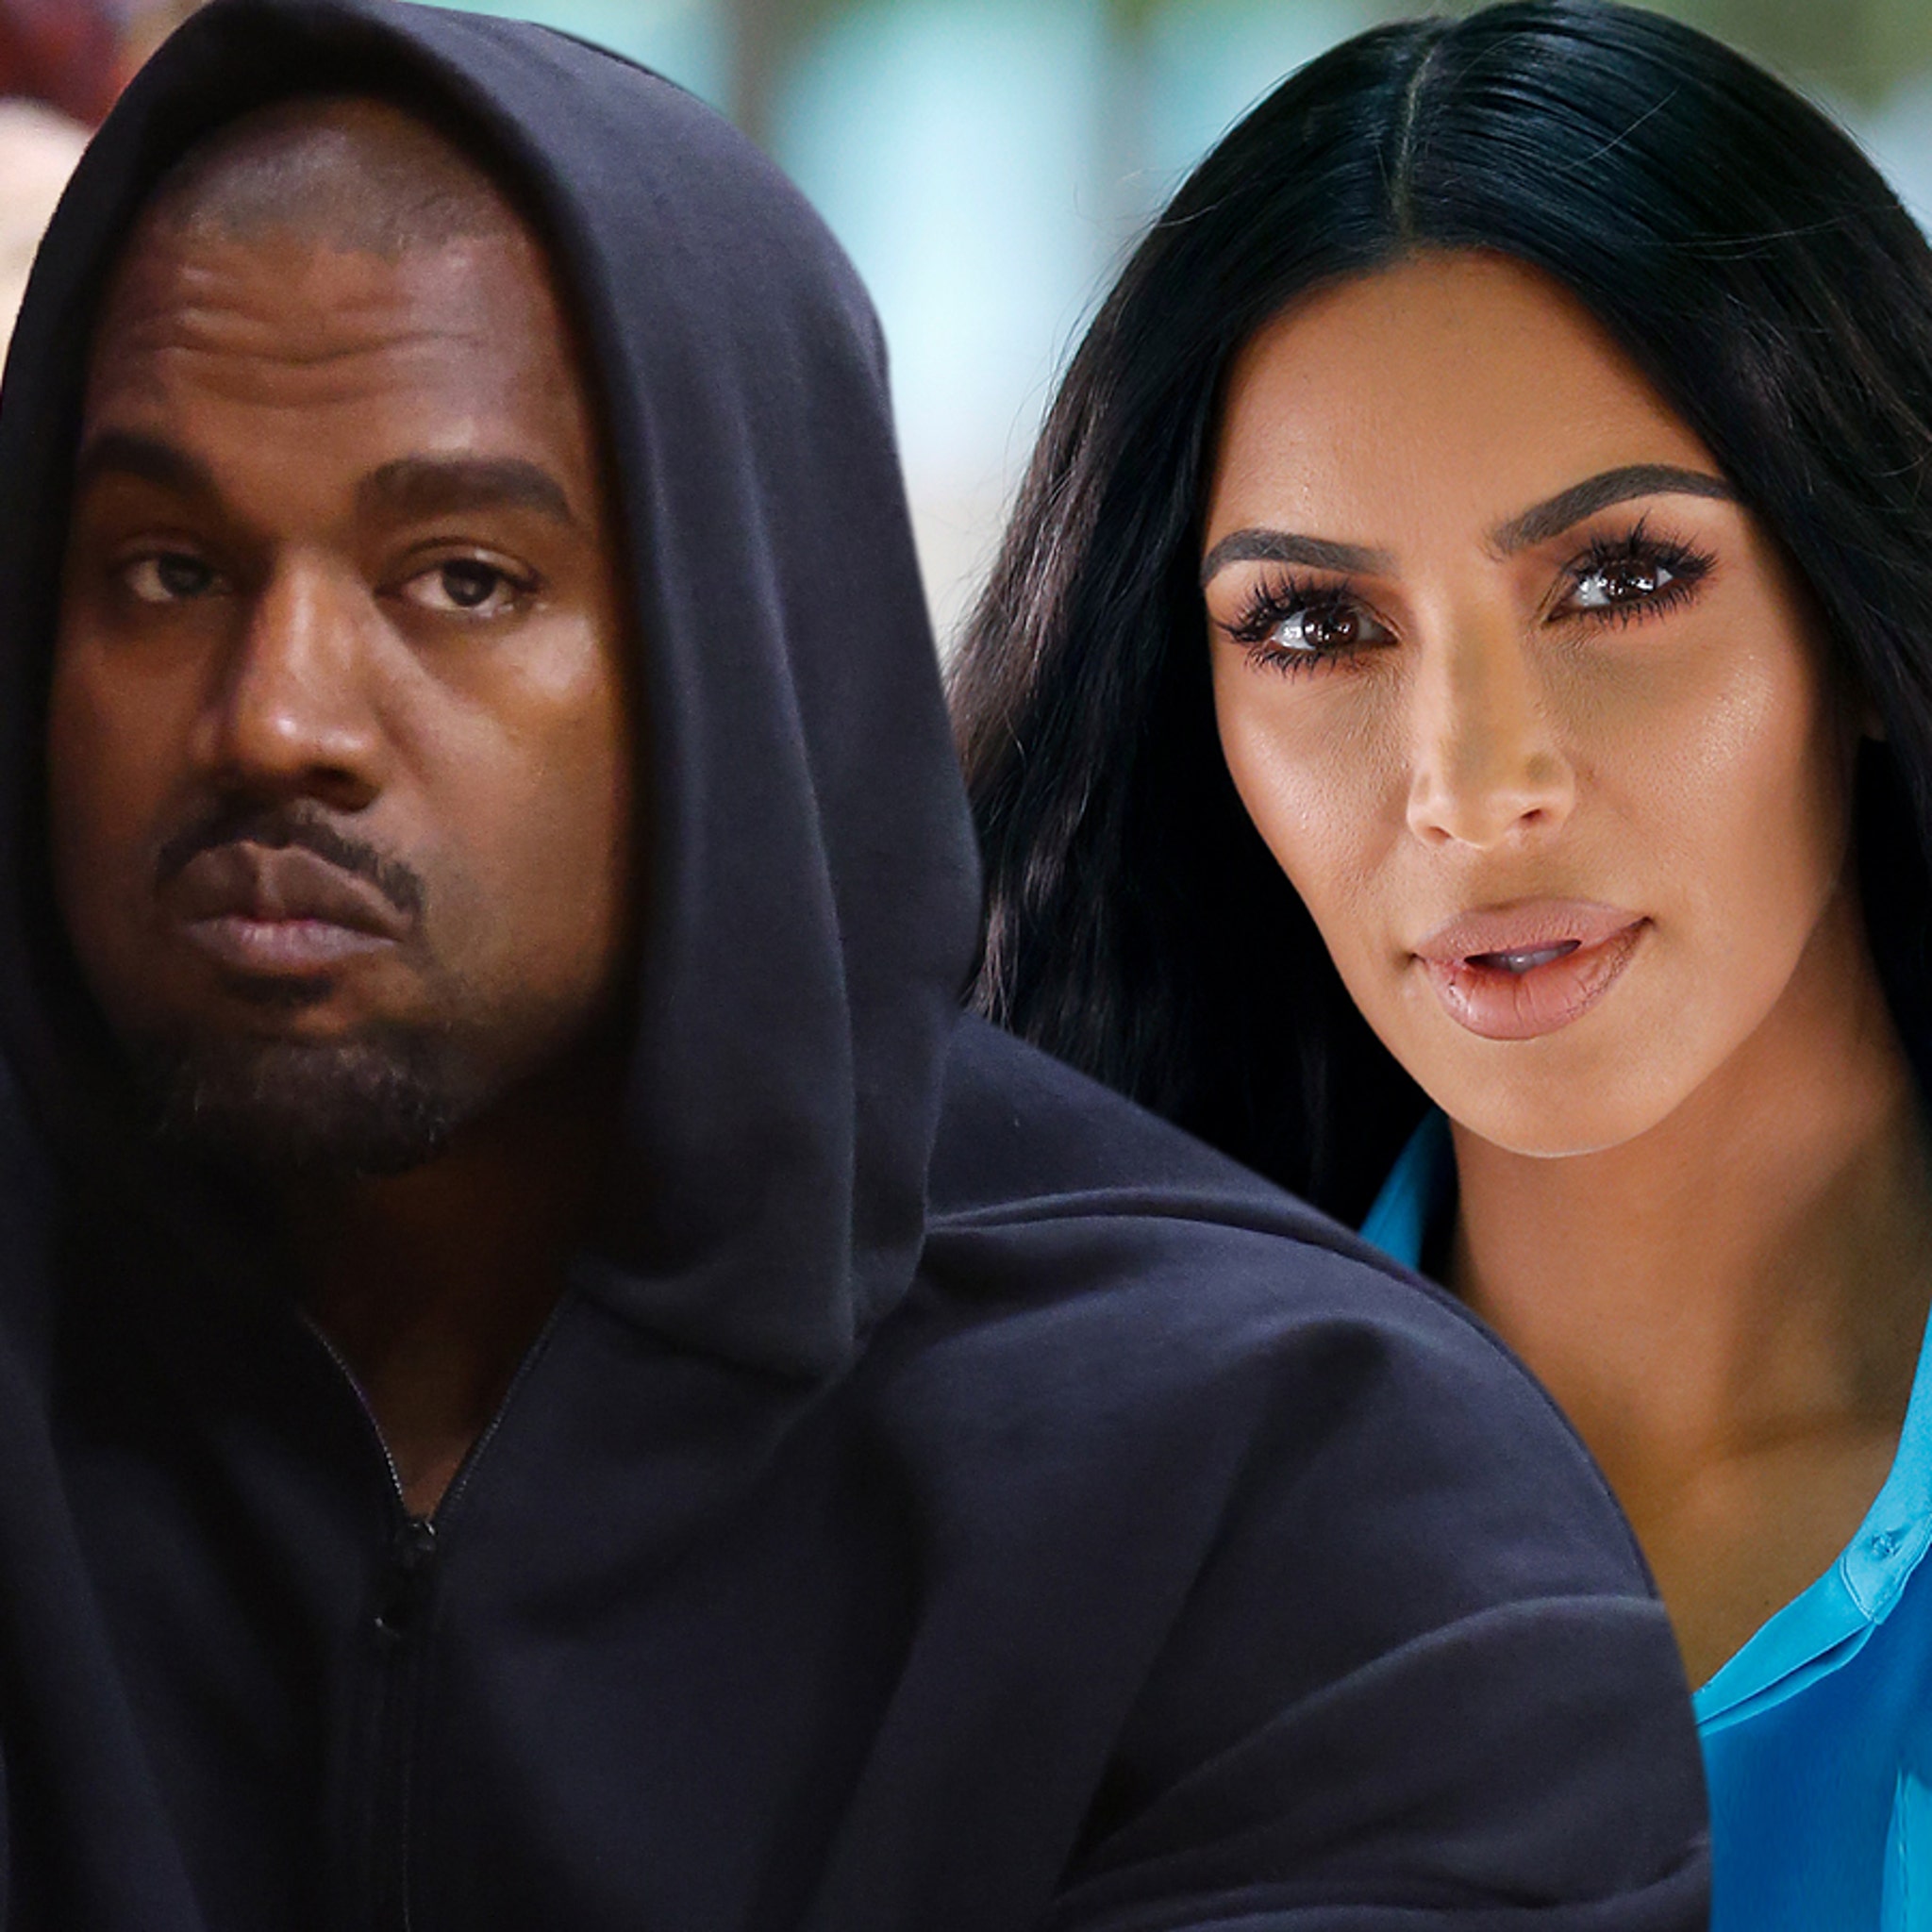 Kanye West Goes After Kim Kardashian and Family, Calls Himself a Sperm Donor